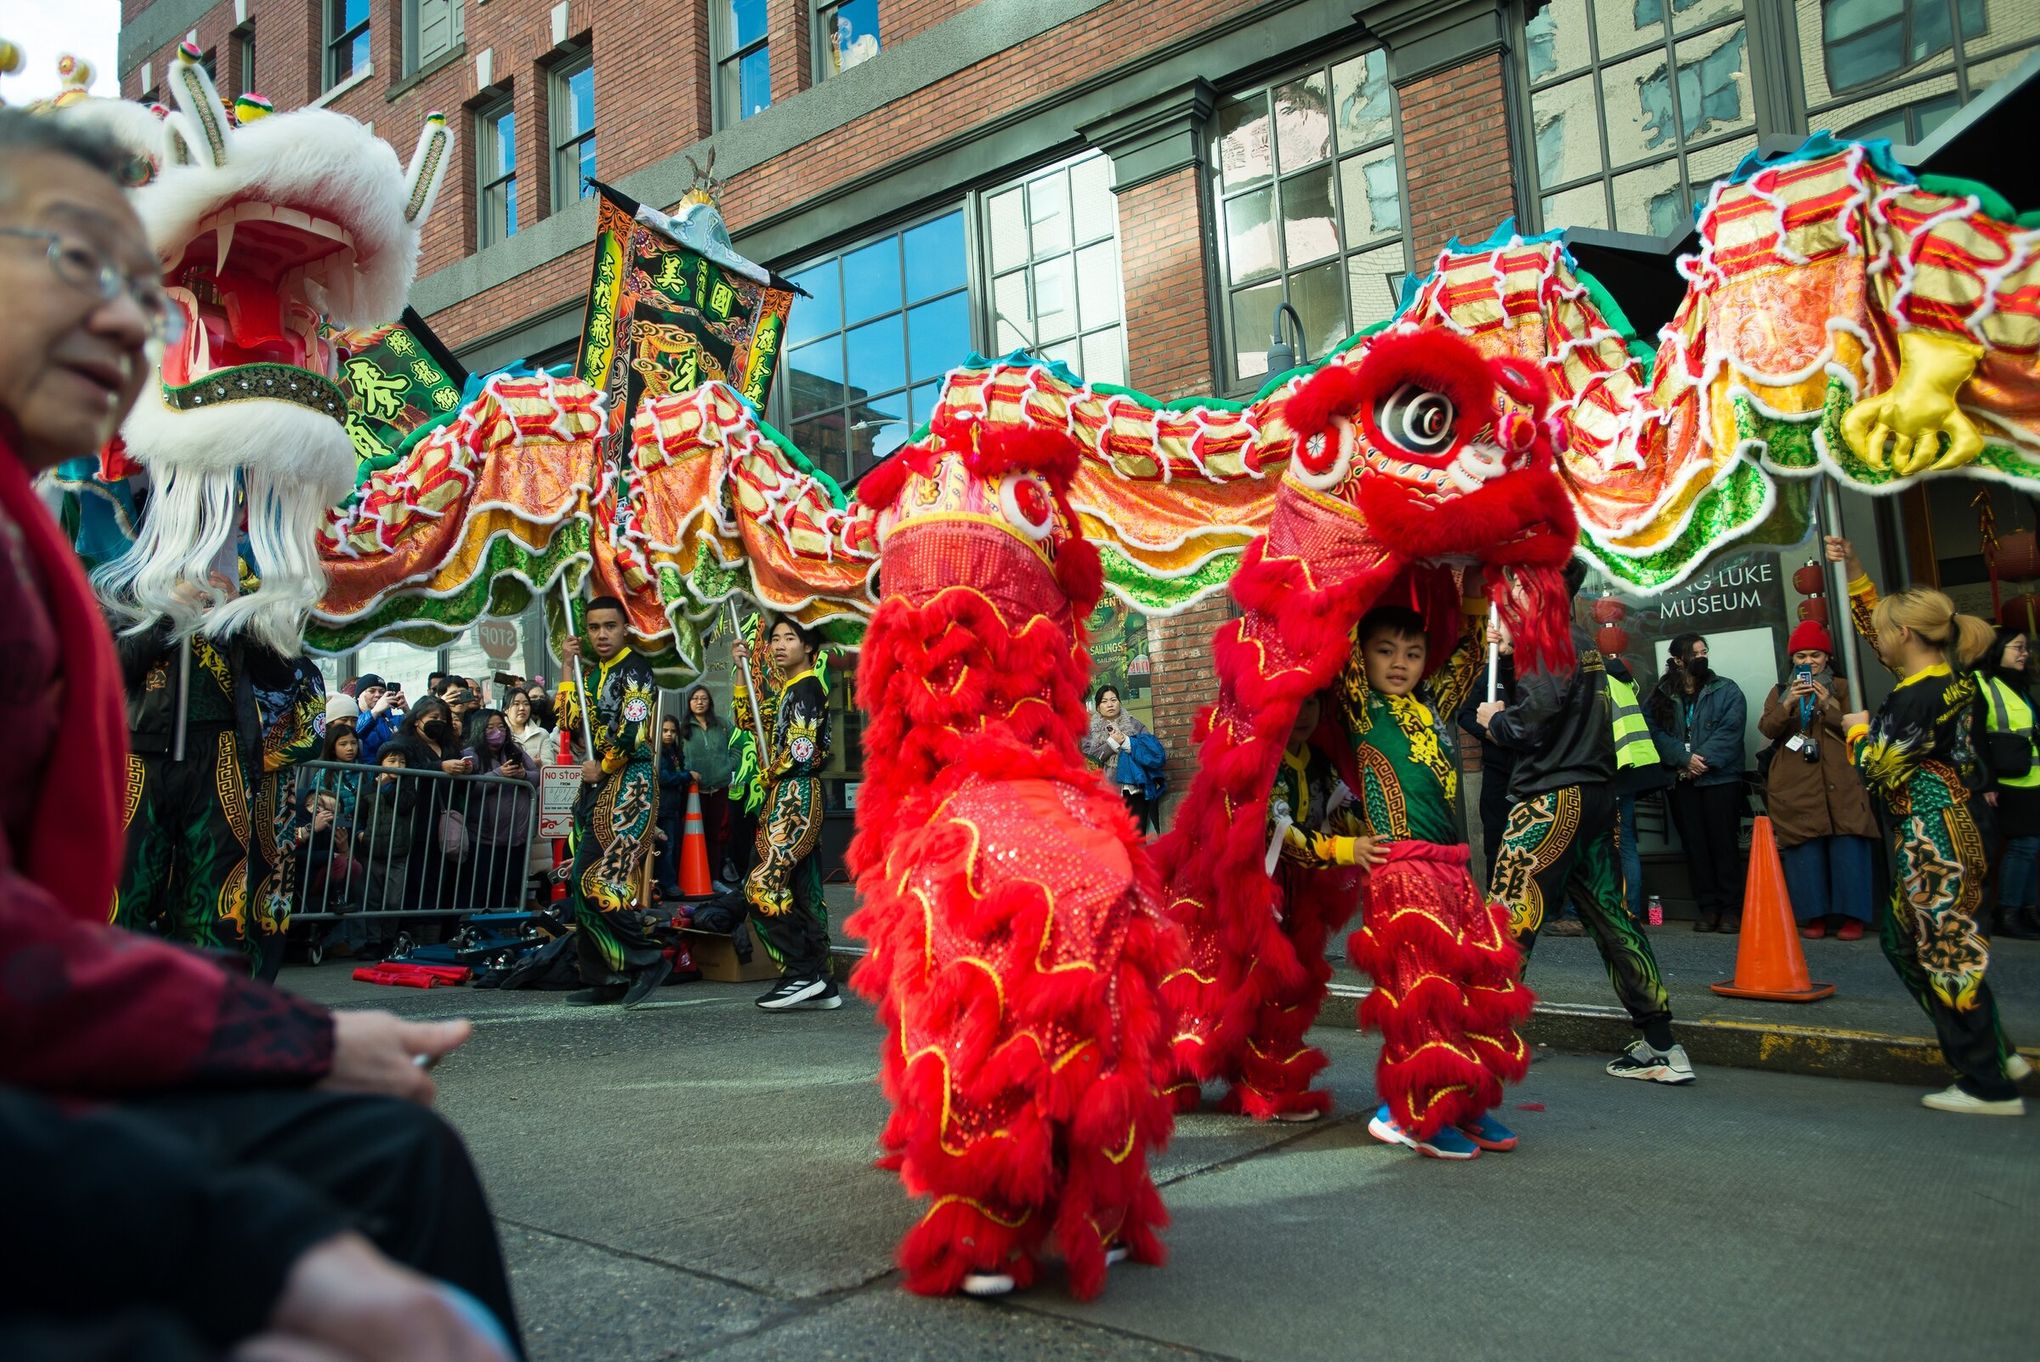 What is Lunar New Year? Traditions and celebrations for the Year